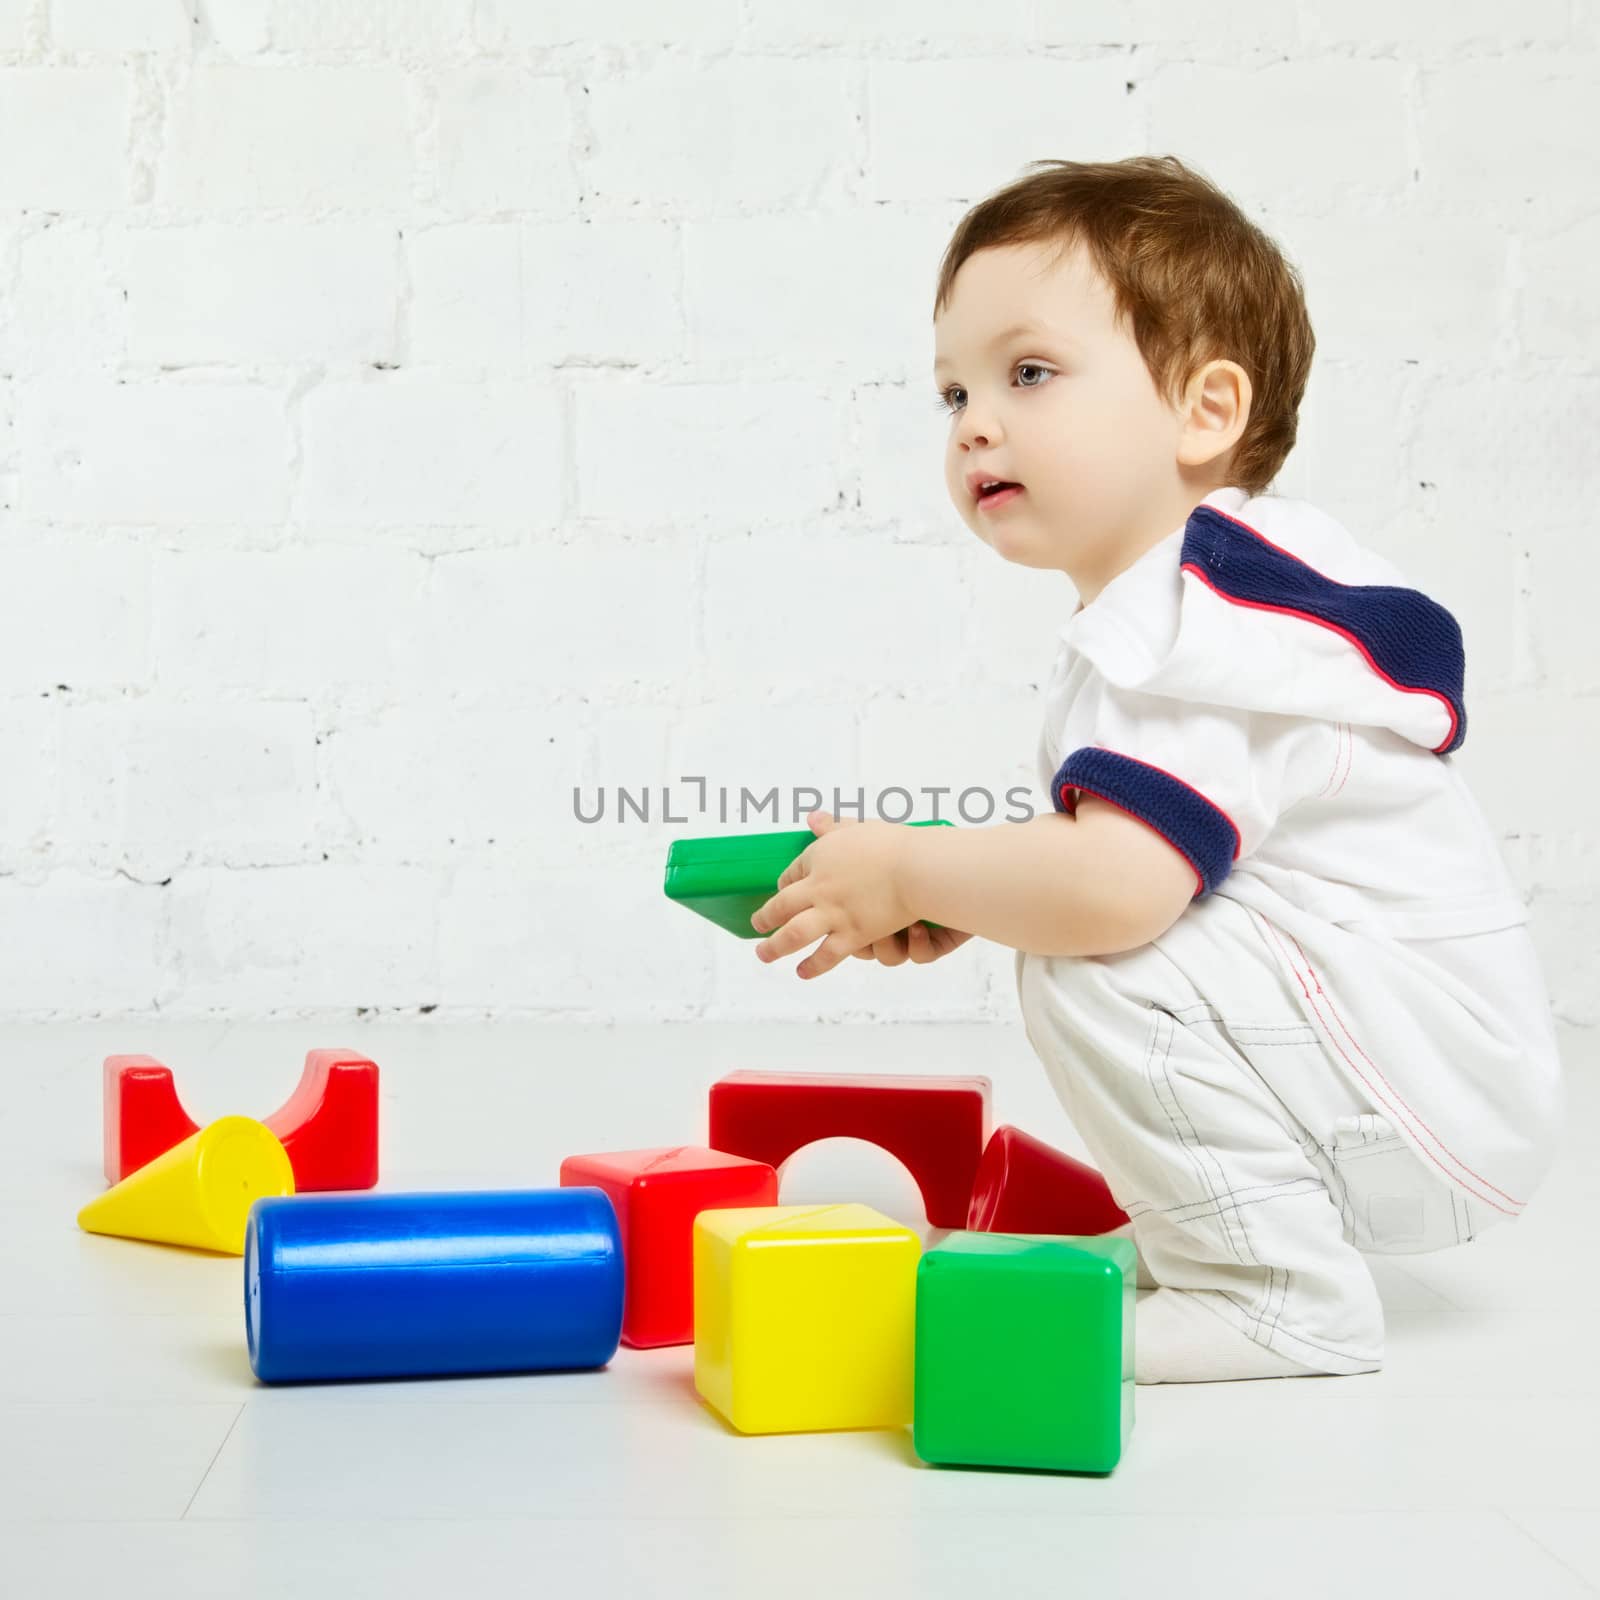 beautiful little boy playing with colorful cubes